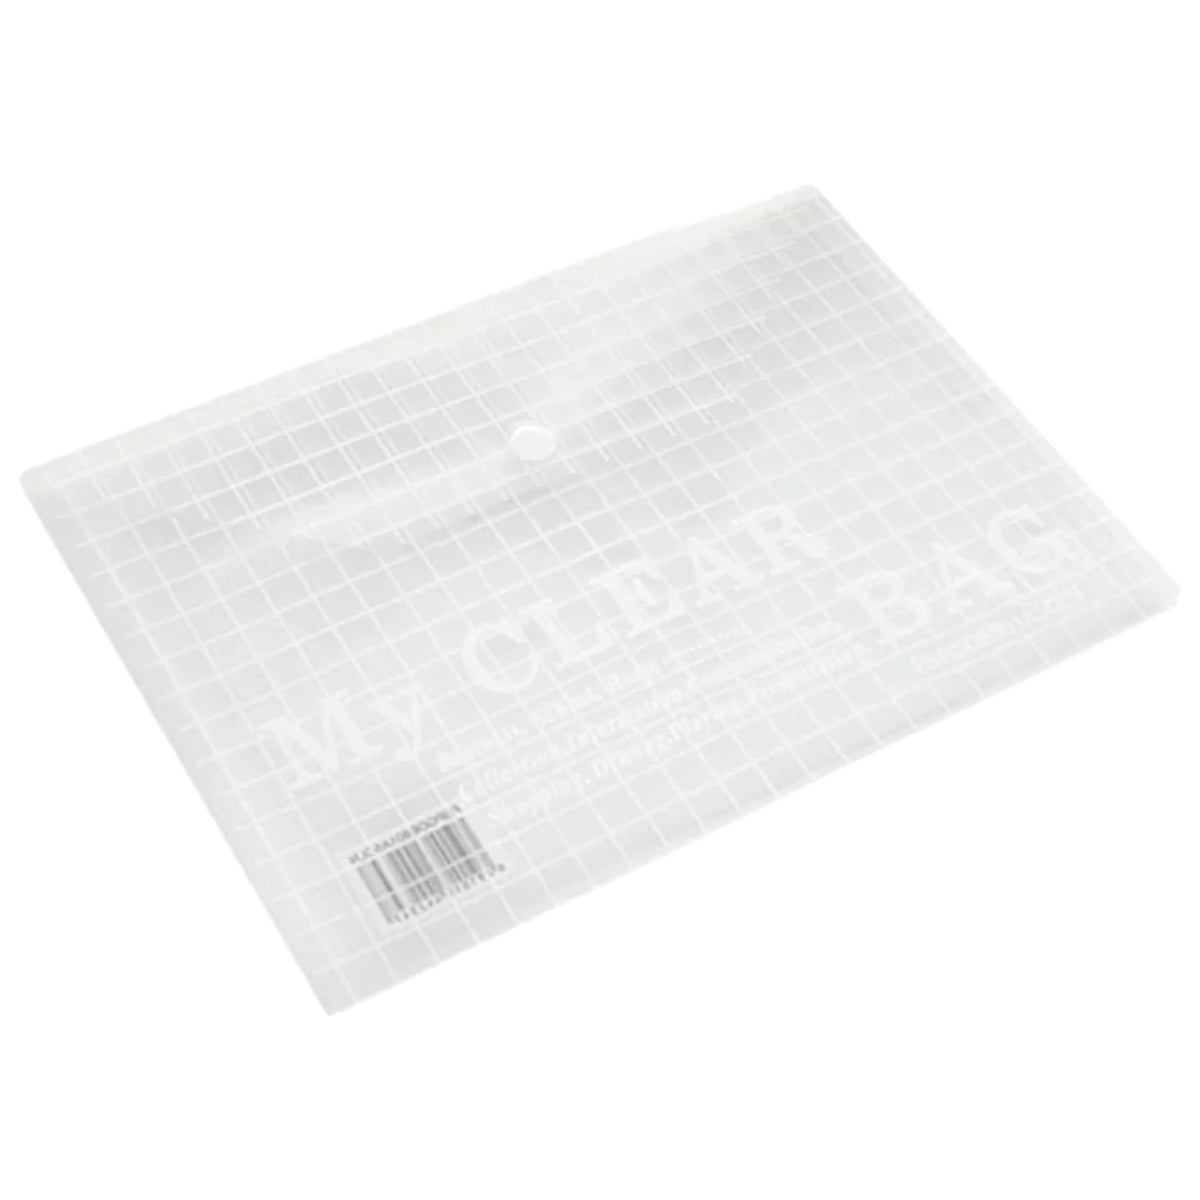 FIS Document Bag "My Clear Bag" A4, 12/pack, Clear